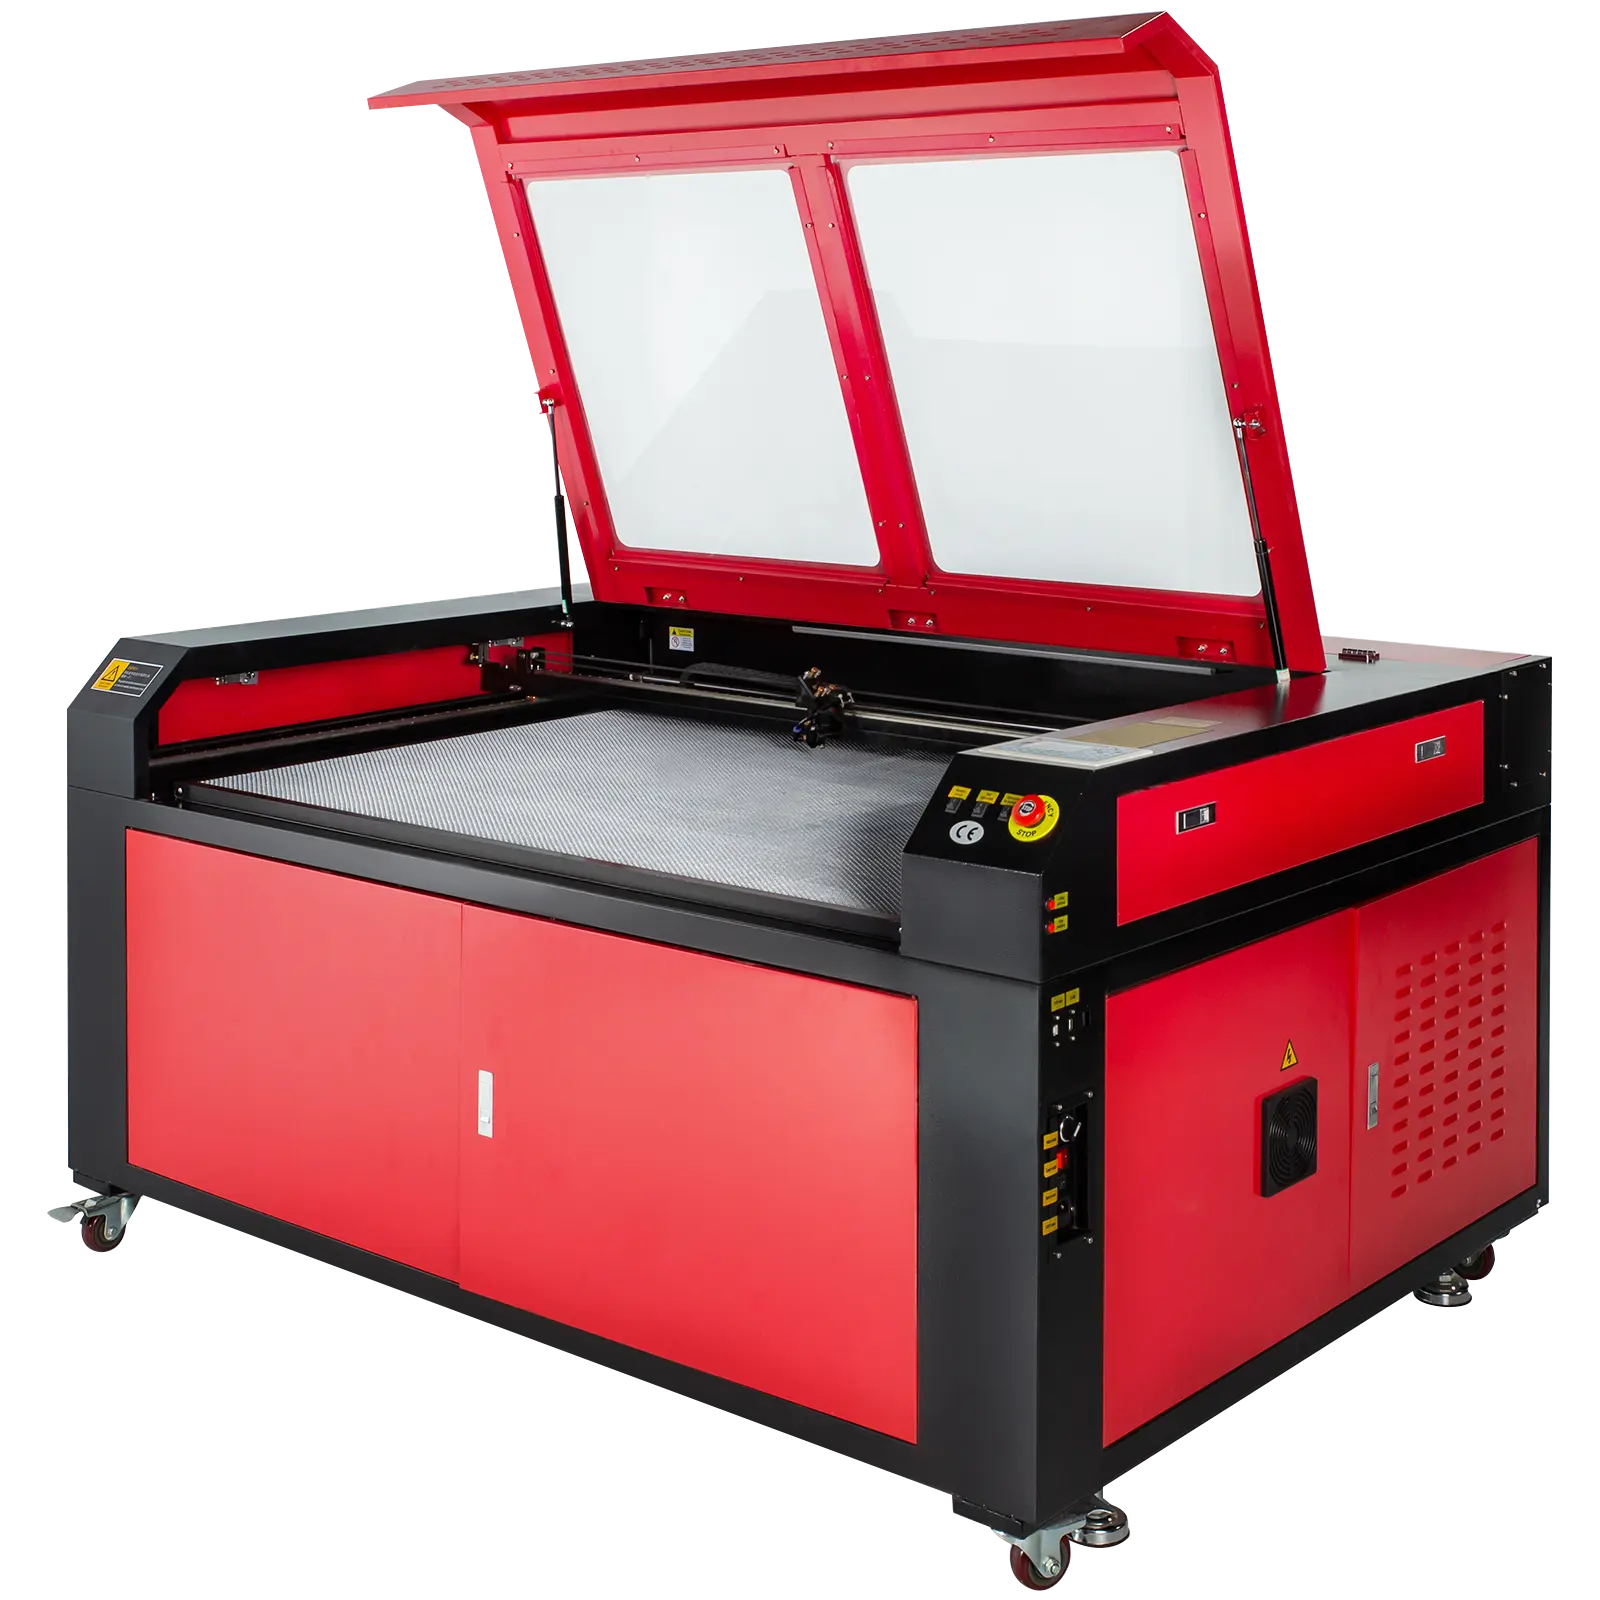 Upgraded 1490 100w CO2 Laser Engraver Engraving Cutting Machine Cutter 1400x900mm laser engraver